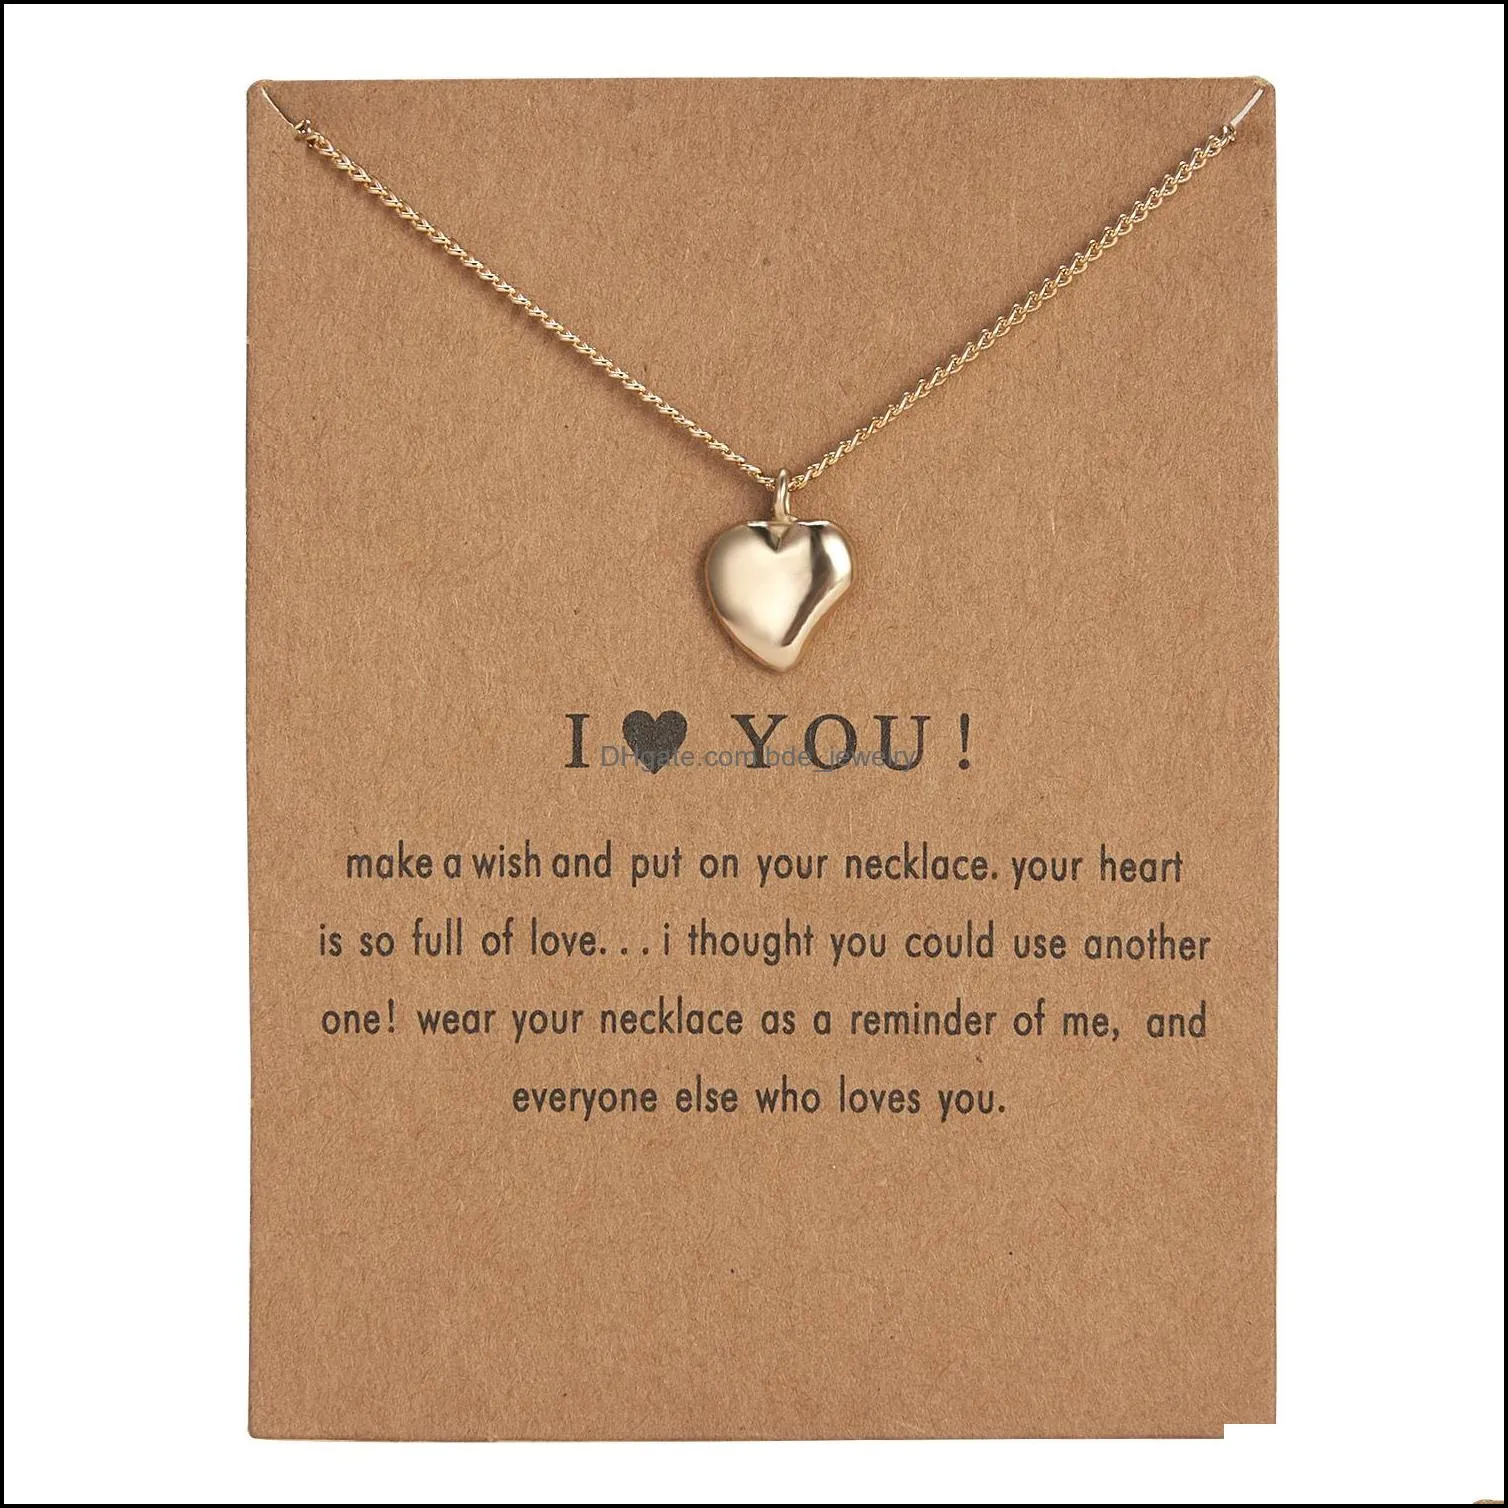 i love you card necklace female gift trendy gold color love heart pendant clavicle chain choker necklaces for women jewelry